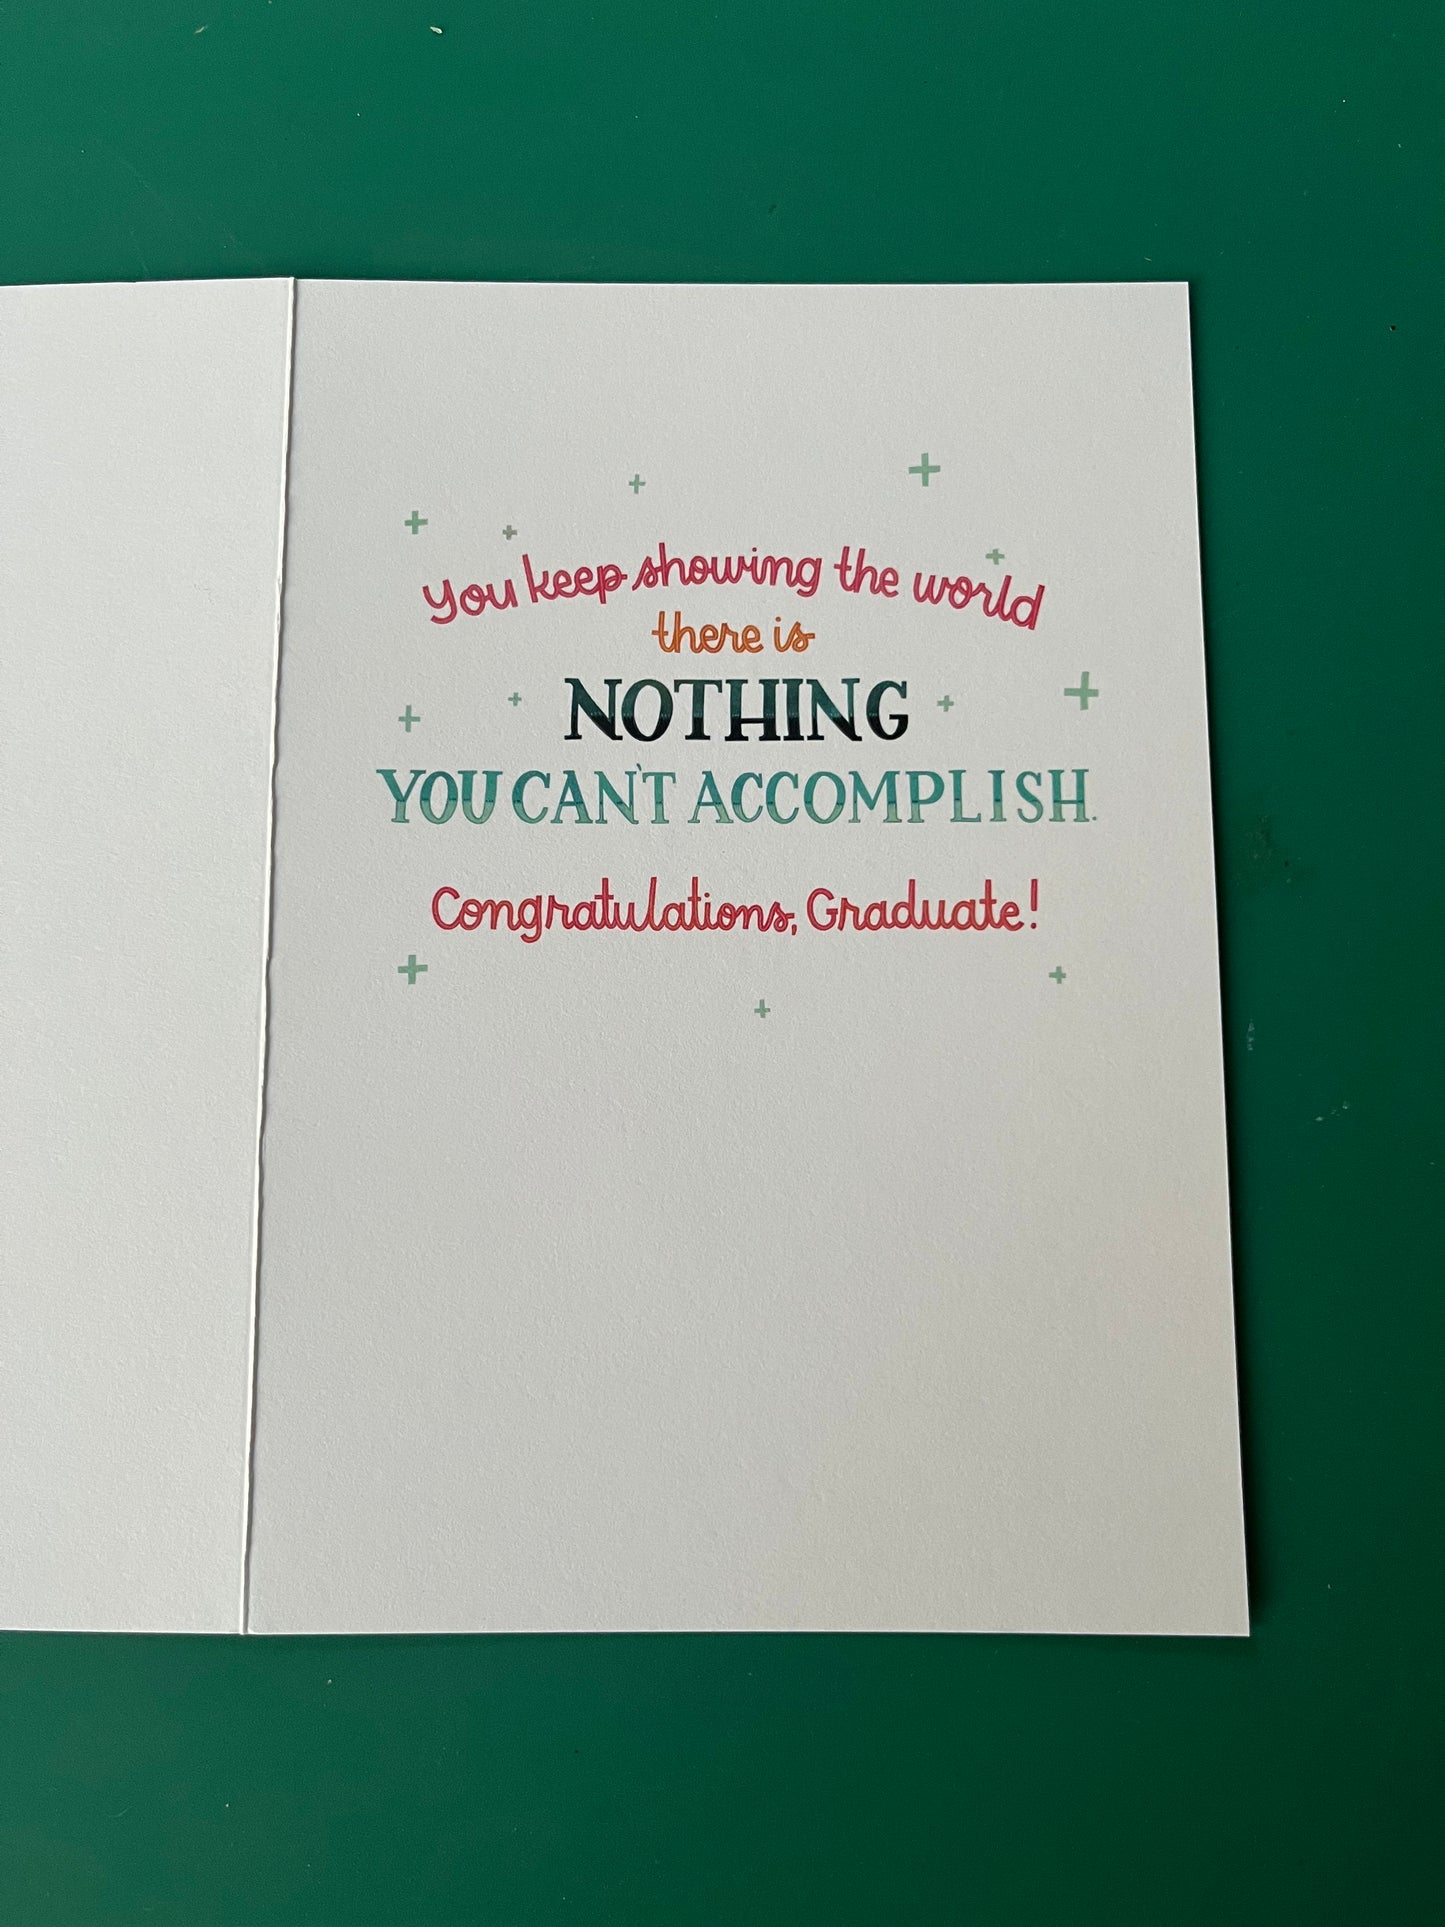 She believed she could - Graduation Card